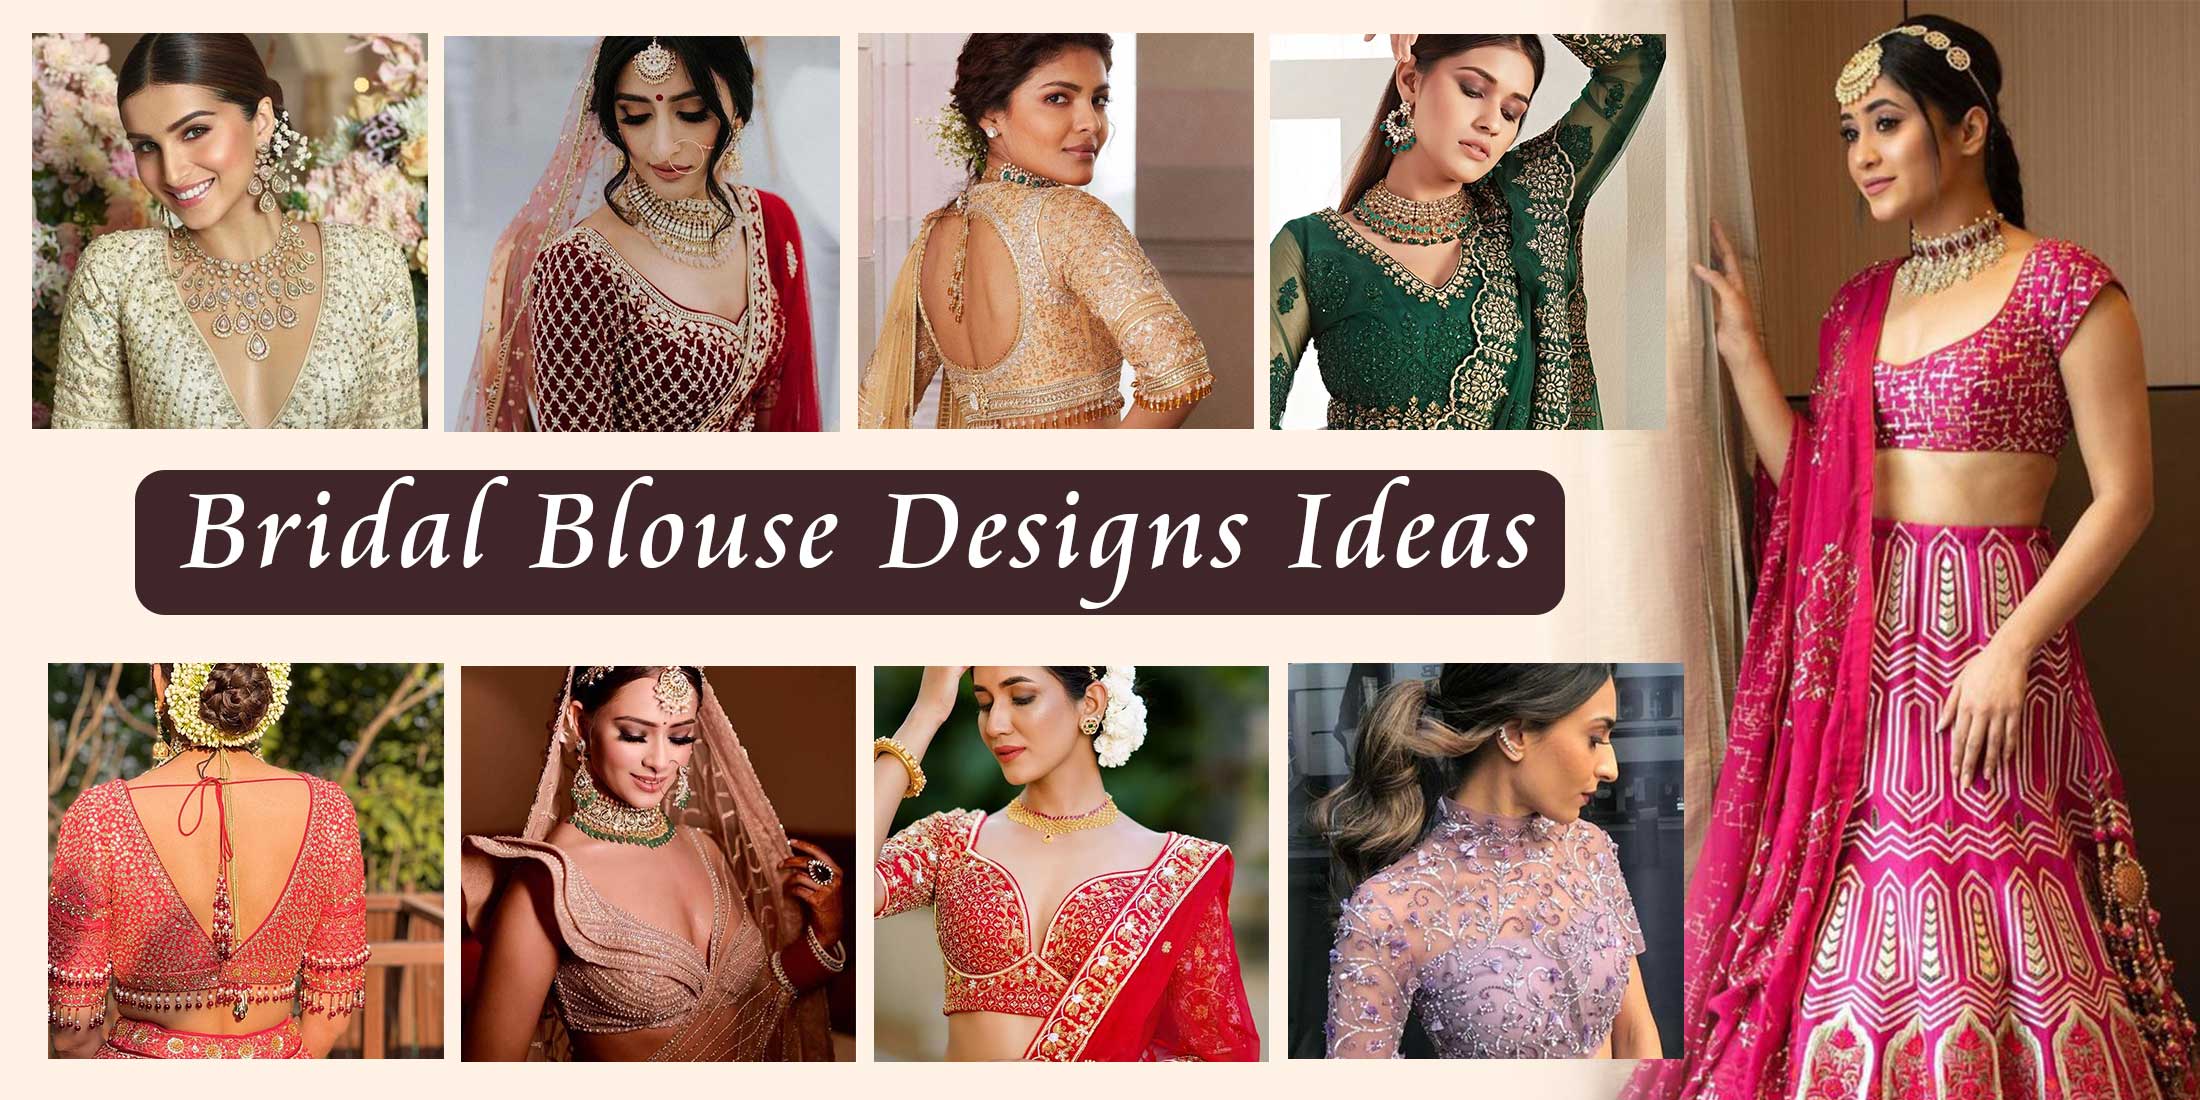 How to Carry a Deep Back Neck Blouse With Elegance at Indian Weddings?